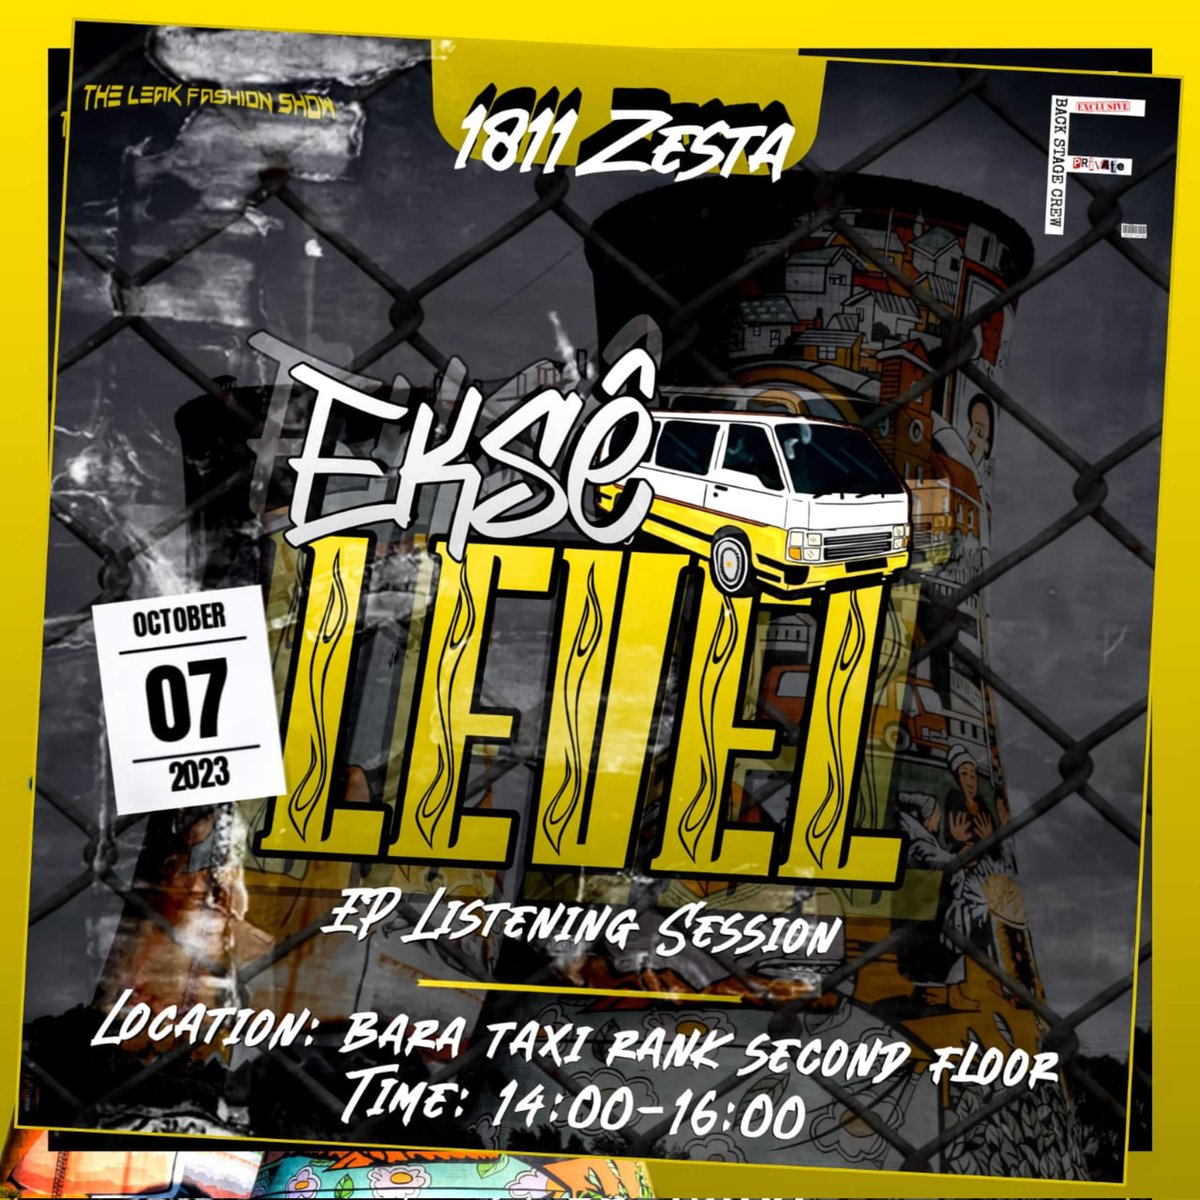 If you around Soweto pull up ...halla for directions

#listeningsession #1811zesta #EkseLevel #hiphop